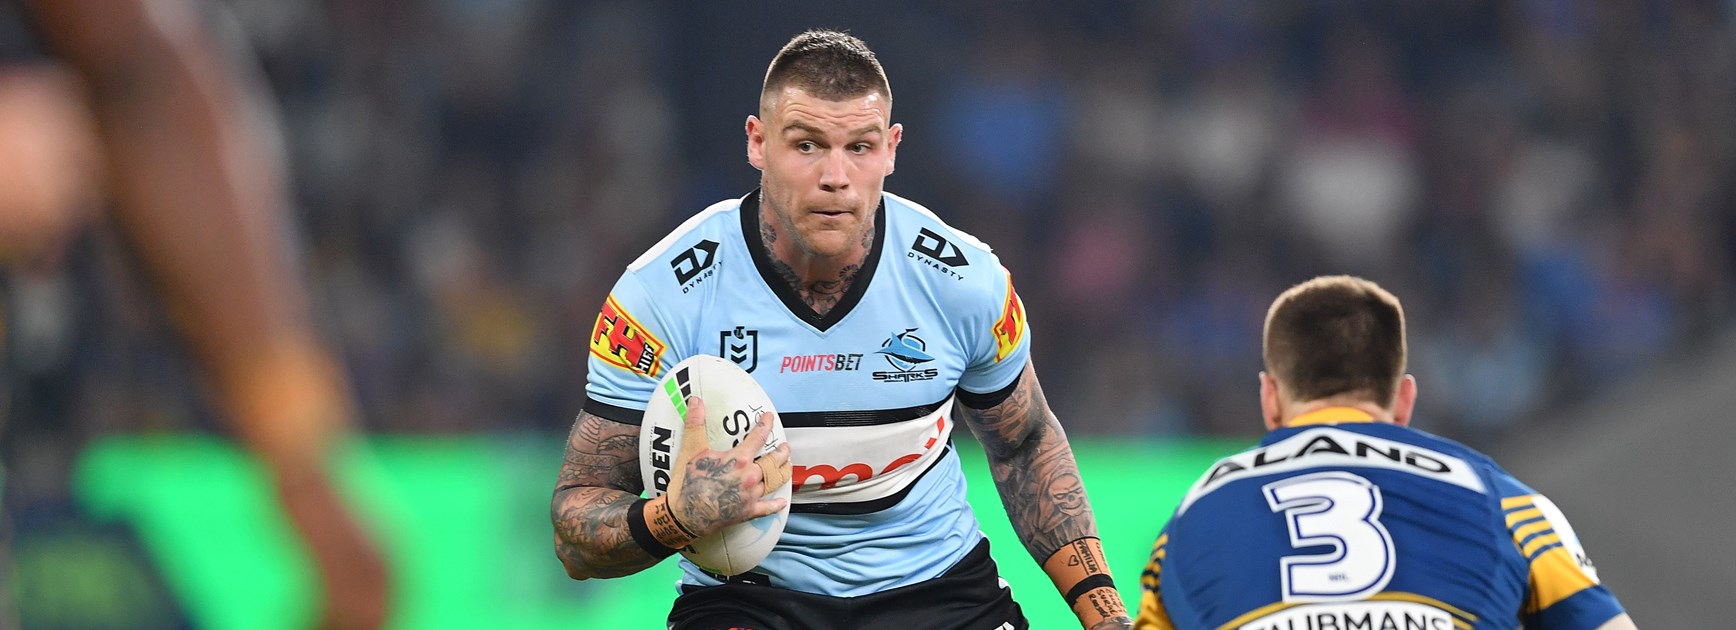 Dugan open to rugby switch but Sharks remain first choice